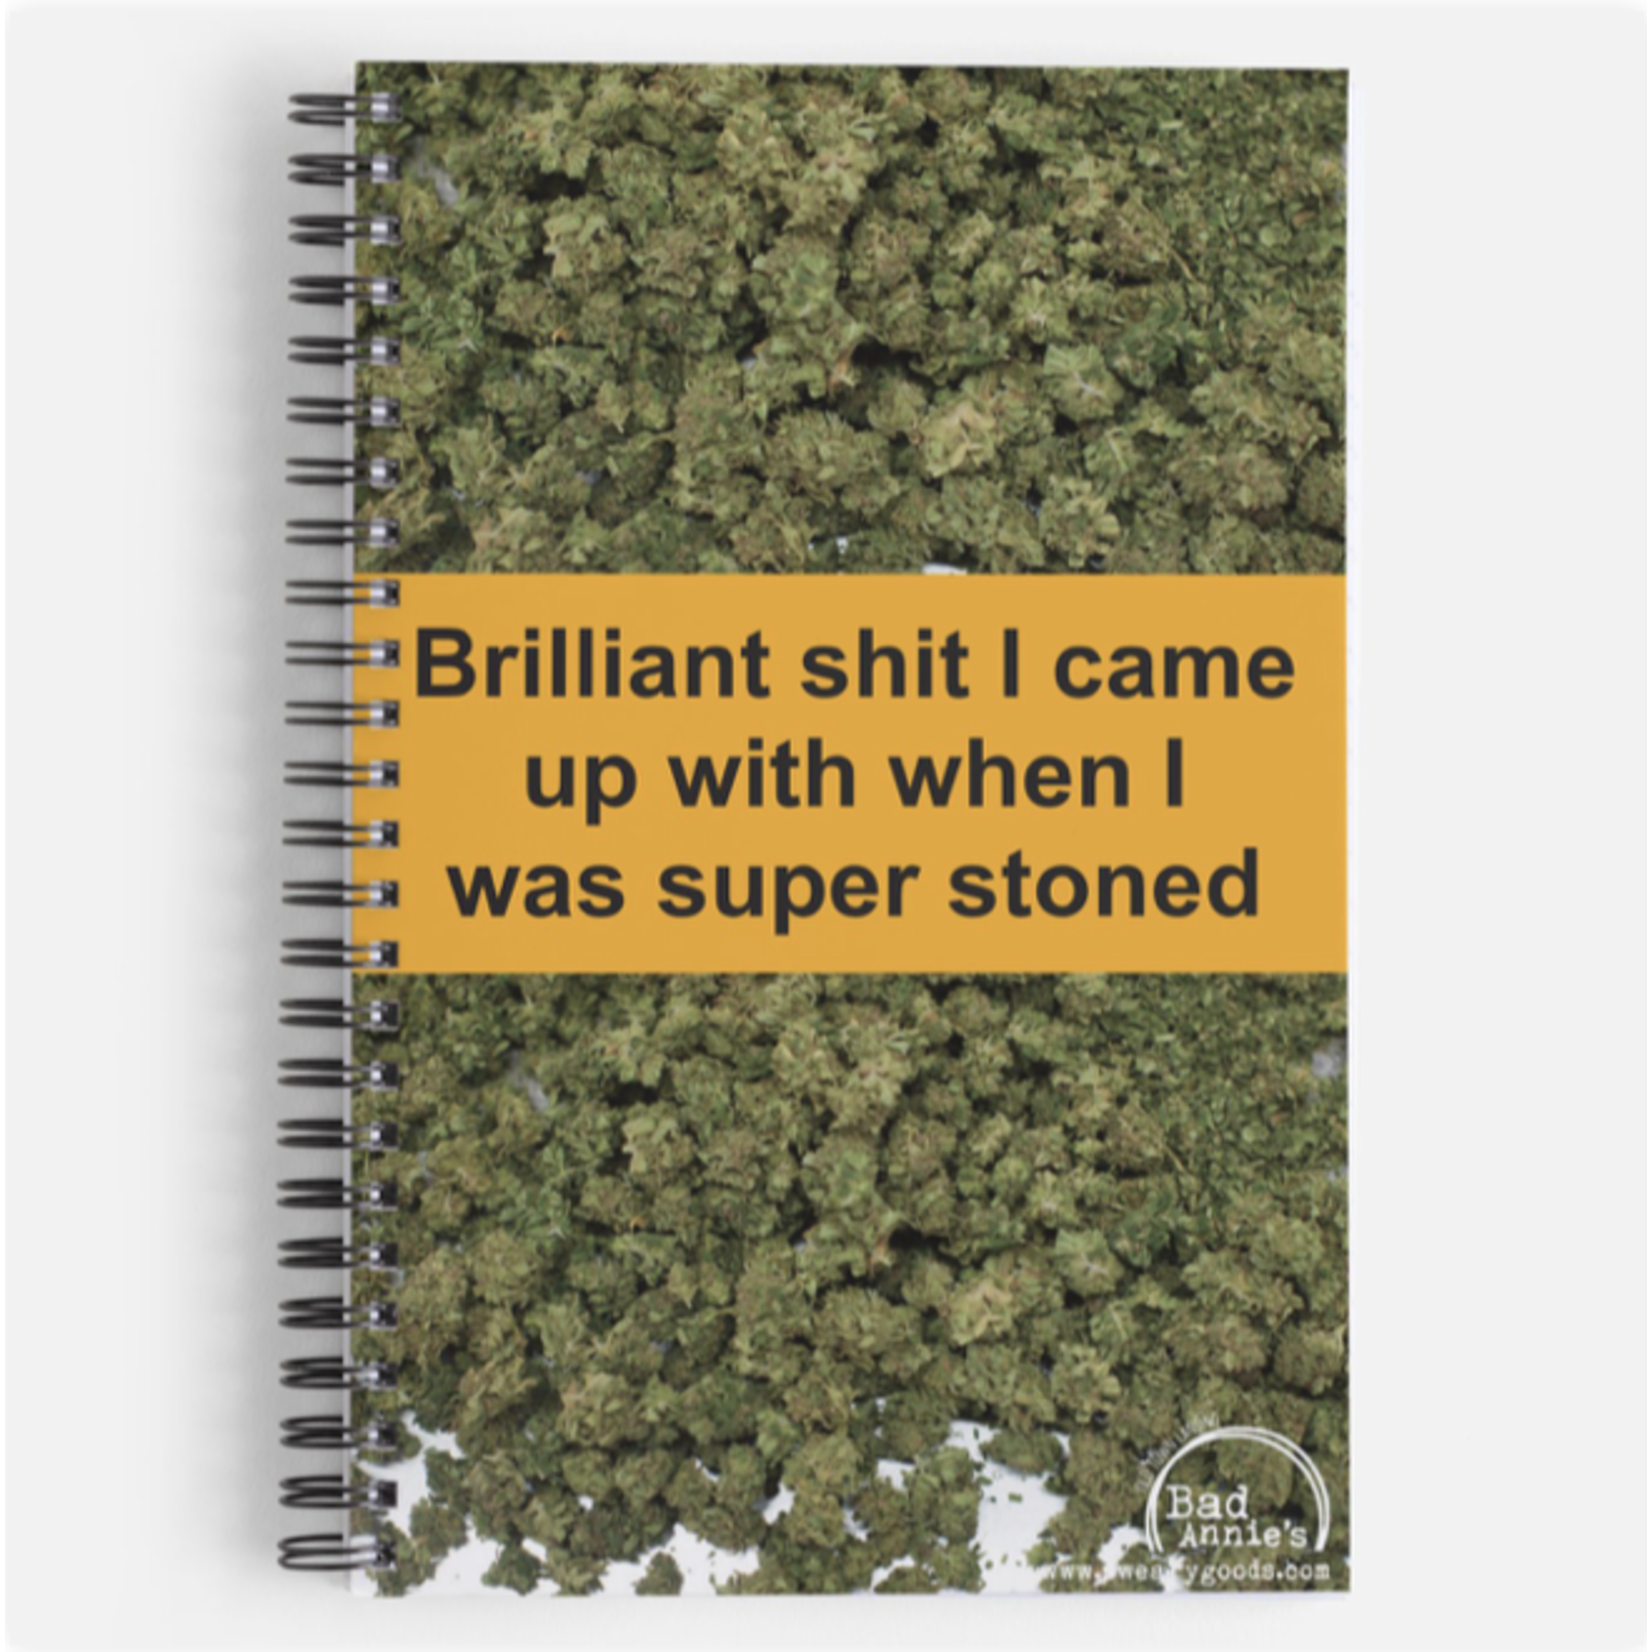 Bad Annie’s Notebook - Brilliant Shit I Came Up With When I Was Super Stoned